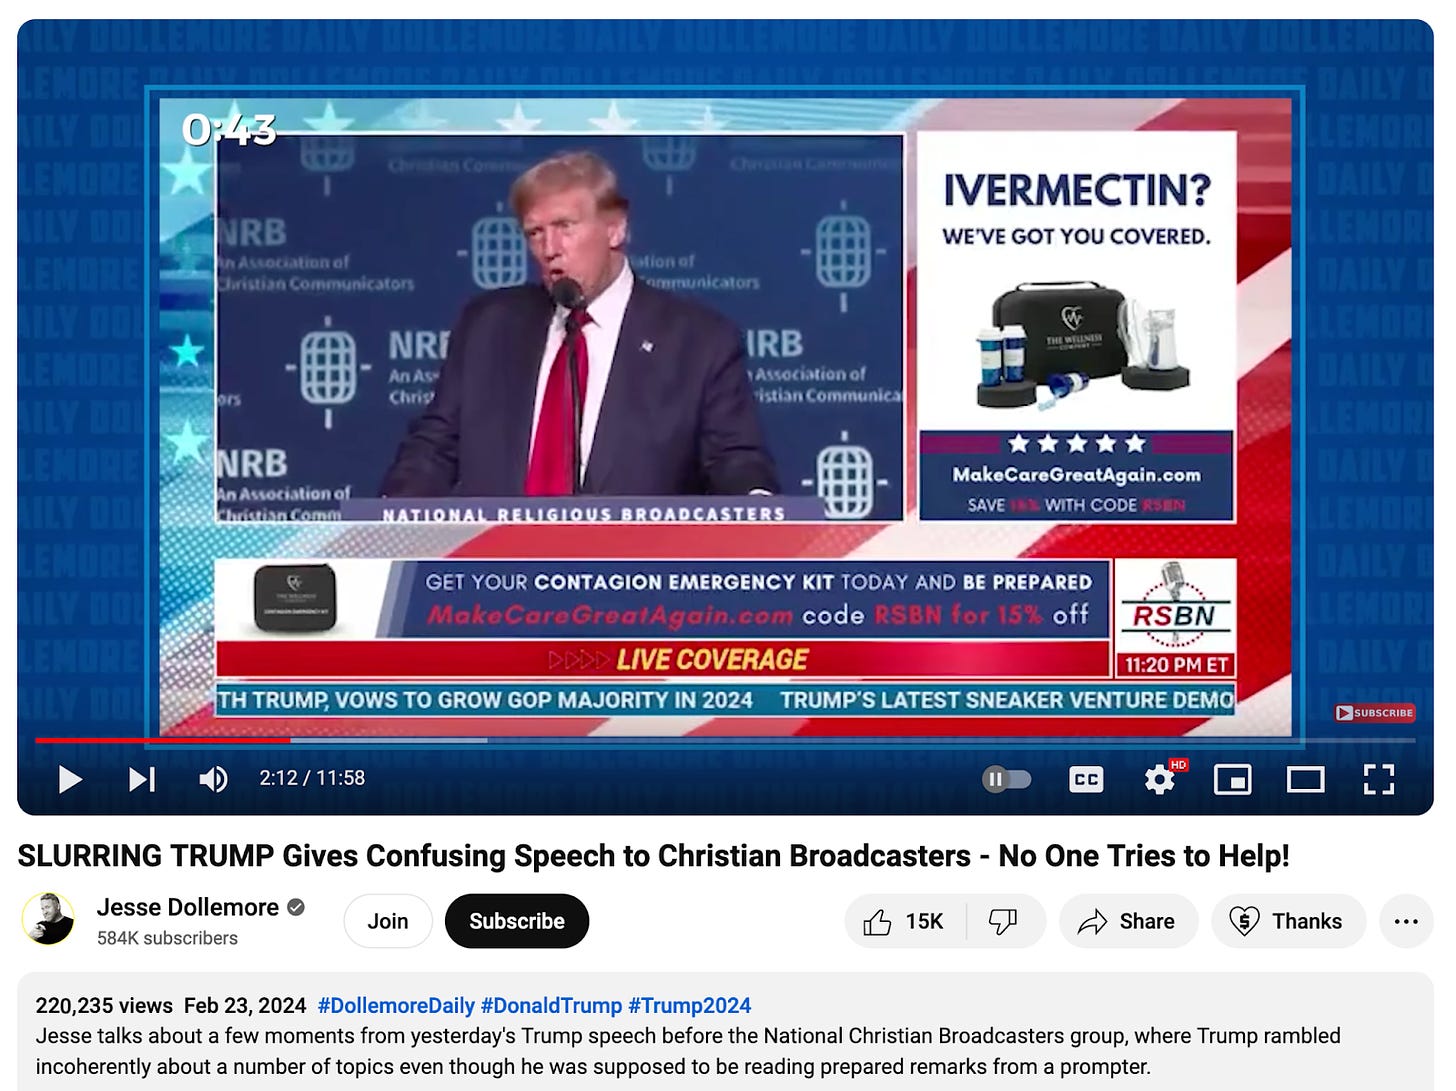 SLURRING TRUMP Gives Confusing Speech to Christian Broadcasters - No One Tries to Help! Feb 23, 2024 Jesse Dollemore (Youtube) The image is a screenshot of timestamp 2:12 in the video. On screen is Donald Trump speaking at a microphone at a podium labeled National Religious Broadcasters. Taking up nearly a quarter of the screen is a big ad that says IVERMECTIN question mark, in all caps. There’s a save with code message under make care great again website. The chiron reads RSBN 1120 PM ET Live Coverage Trump, Vows to grow GOP majority in 2024, Trump’s latest sneaker venture, and above the chiron, below Trump, is another ad chiron that says get yoru contagion emergency kit today and be prepared and more codes for discount offers. The Youtube description box reads 220,235 views, some hashtags, and the description: Jesse talks about a few moments from yesterday's Trump speech before the National Christian Broadcasters group, where Trump rambled incoherently about a number of topics even though he was supposed to be reading prepared remarks from a prompter.